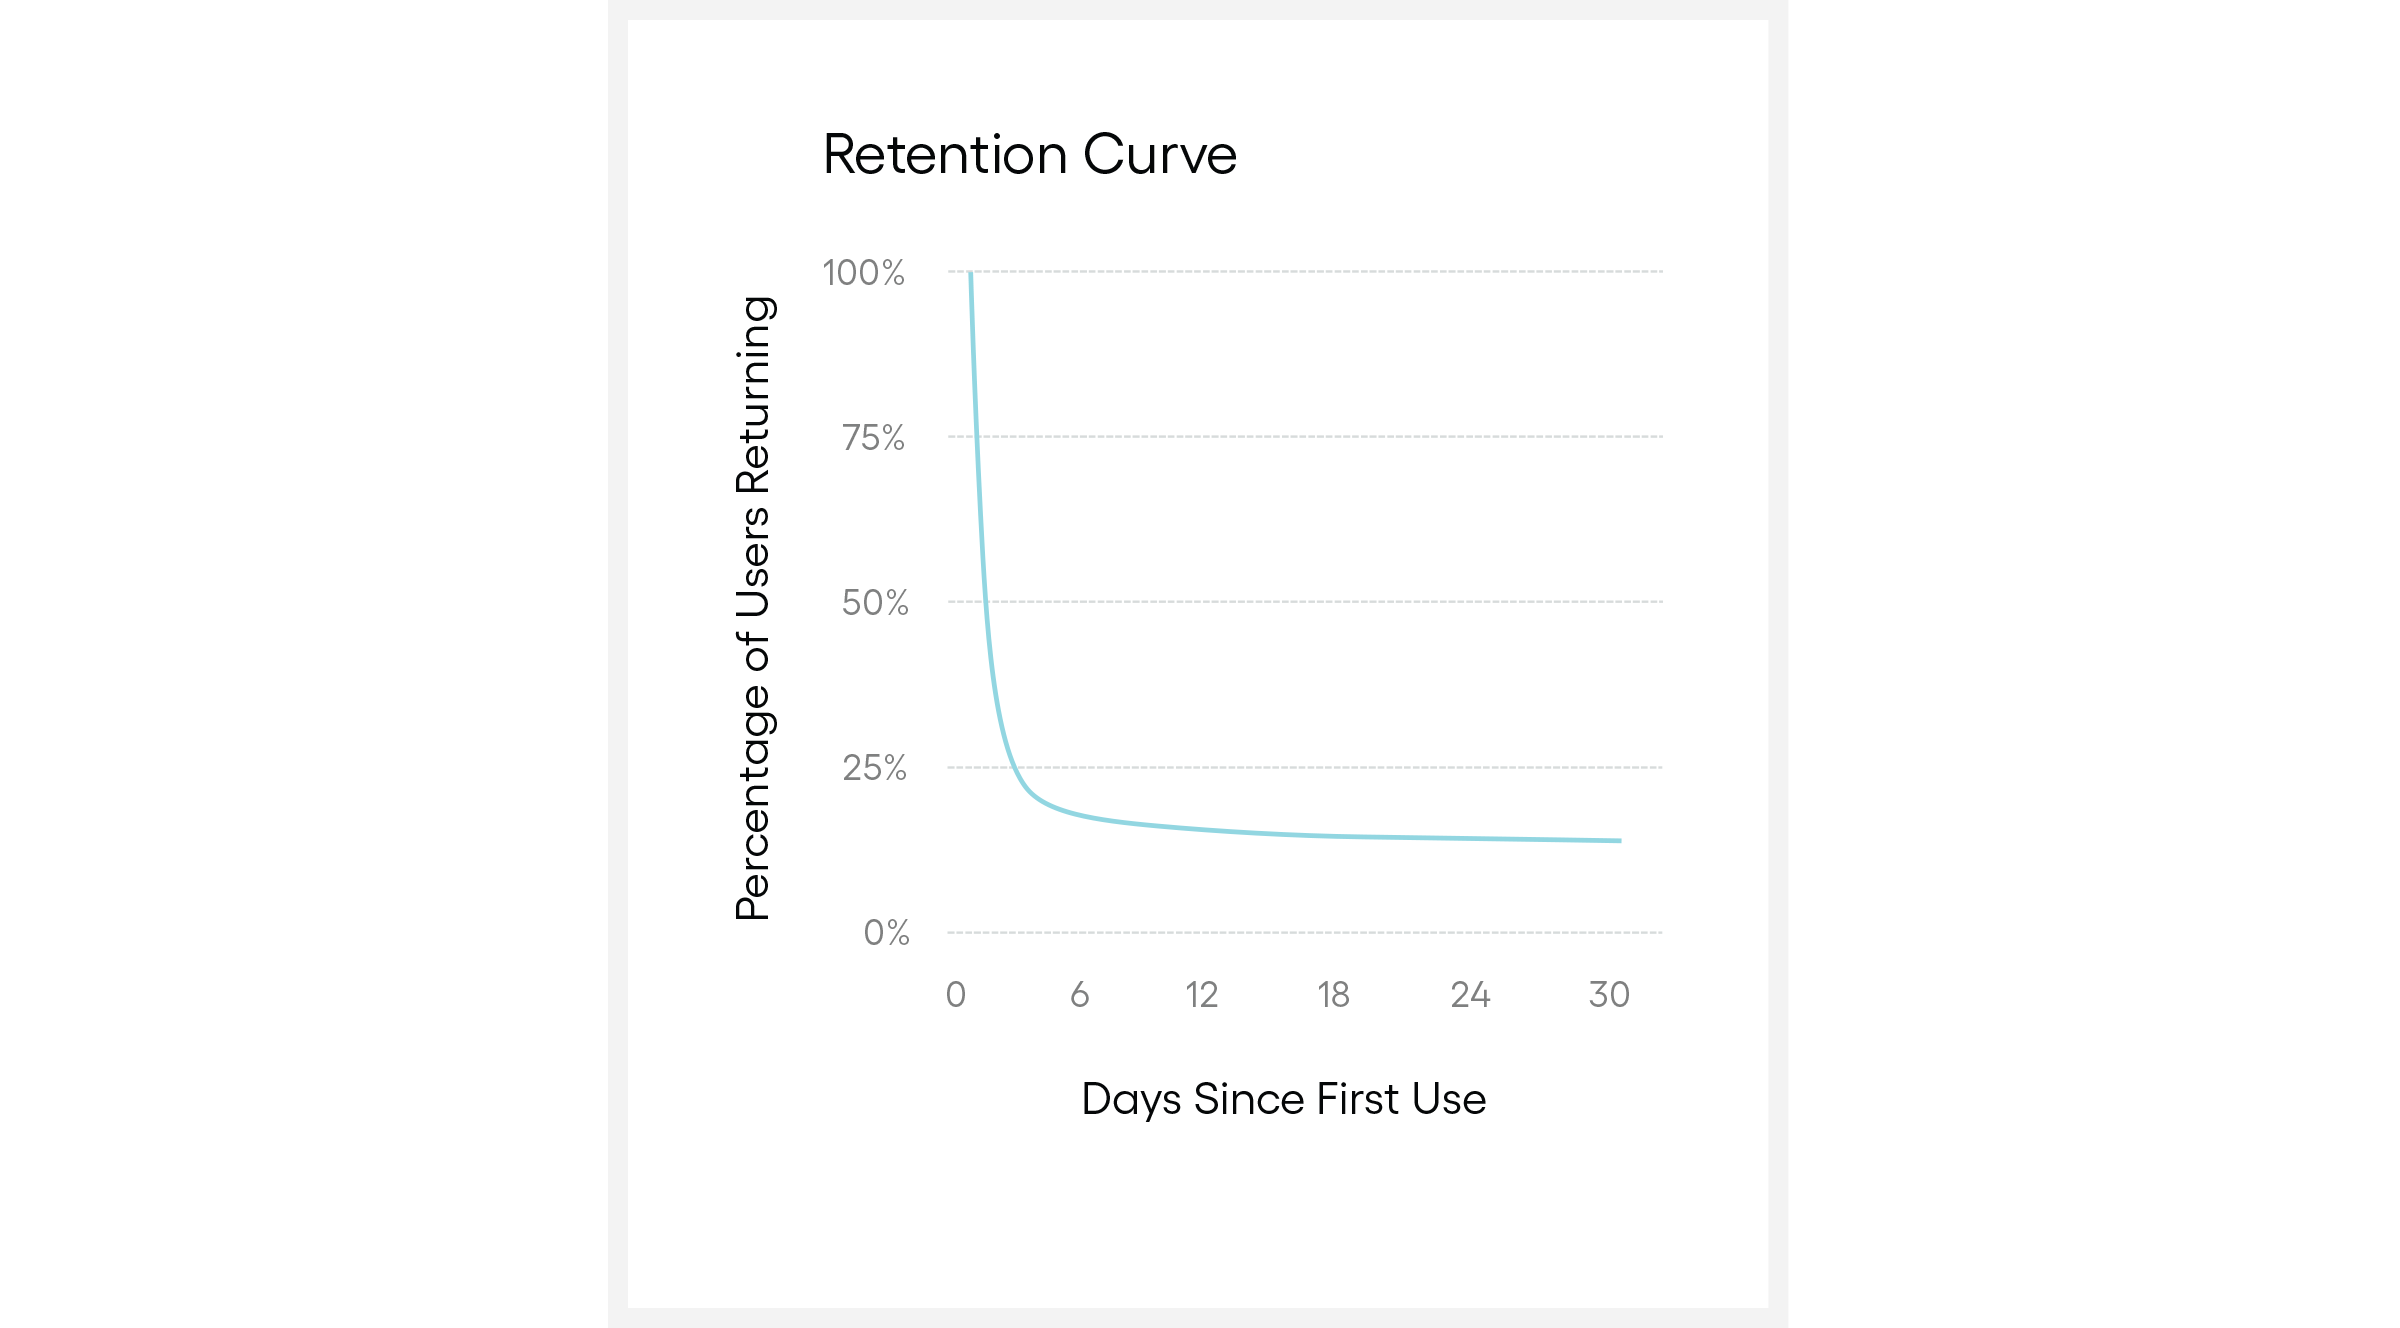 According to this retention curve, of all of the users who first used the product on Day 0, 13% returned and were active on Day 7. You can also quickly visualize the drop-off from Day 0 to Day 1.